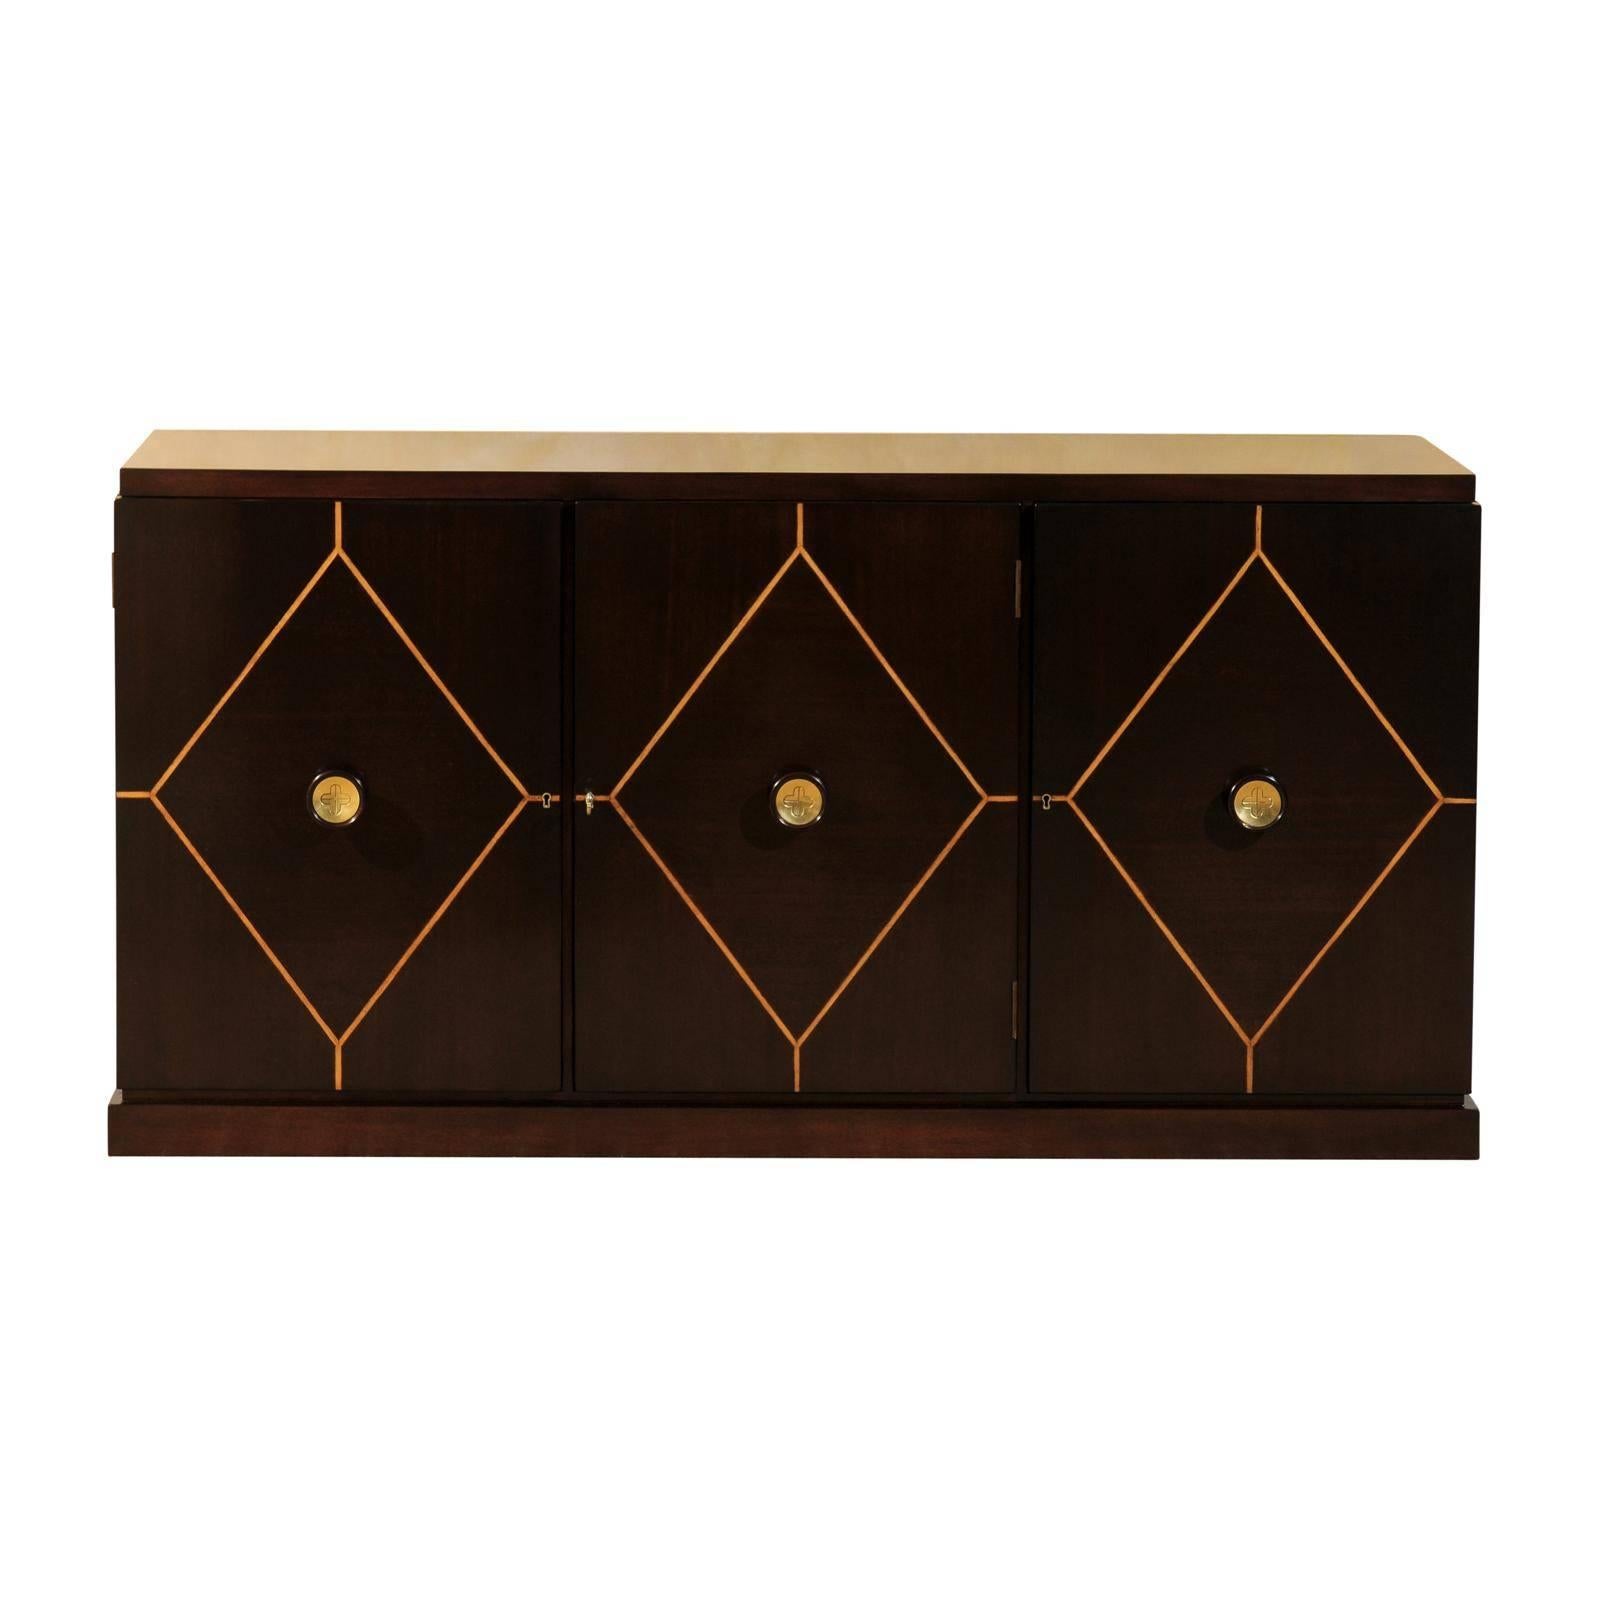 Elegant Restored Mahogany Cabinet or Buffet by Tommi Parzinger for Charak Modern